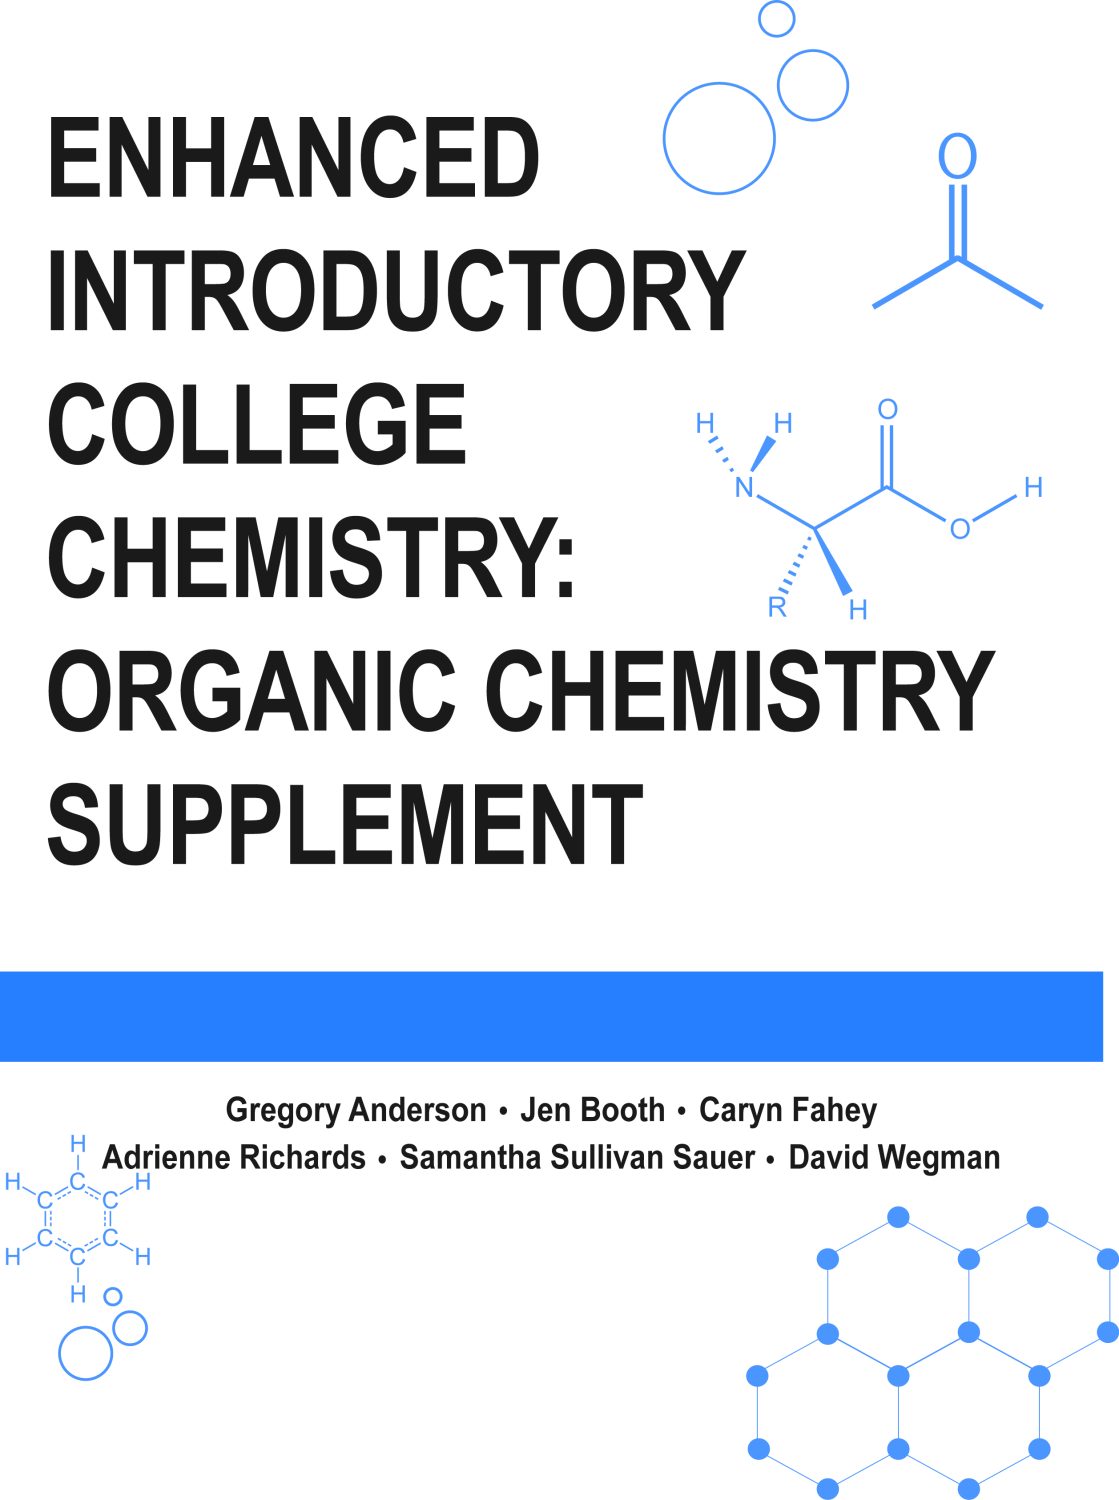 Cover image for Organic and Biochemistry Supplement to Enhanced Introductory College Chemistry